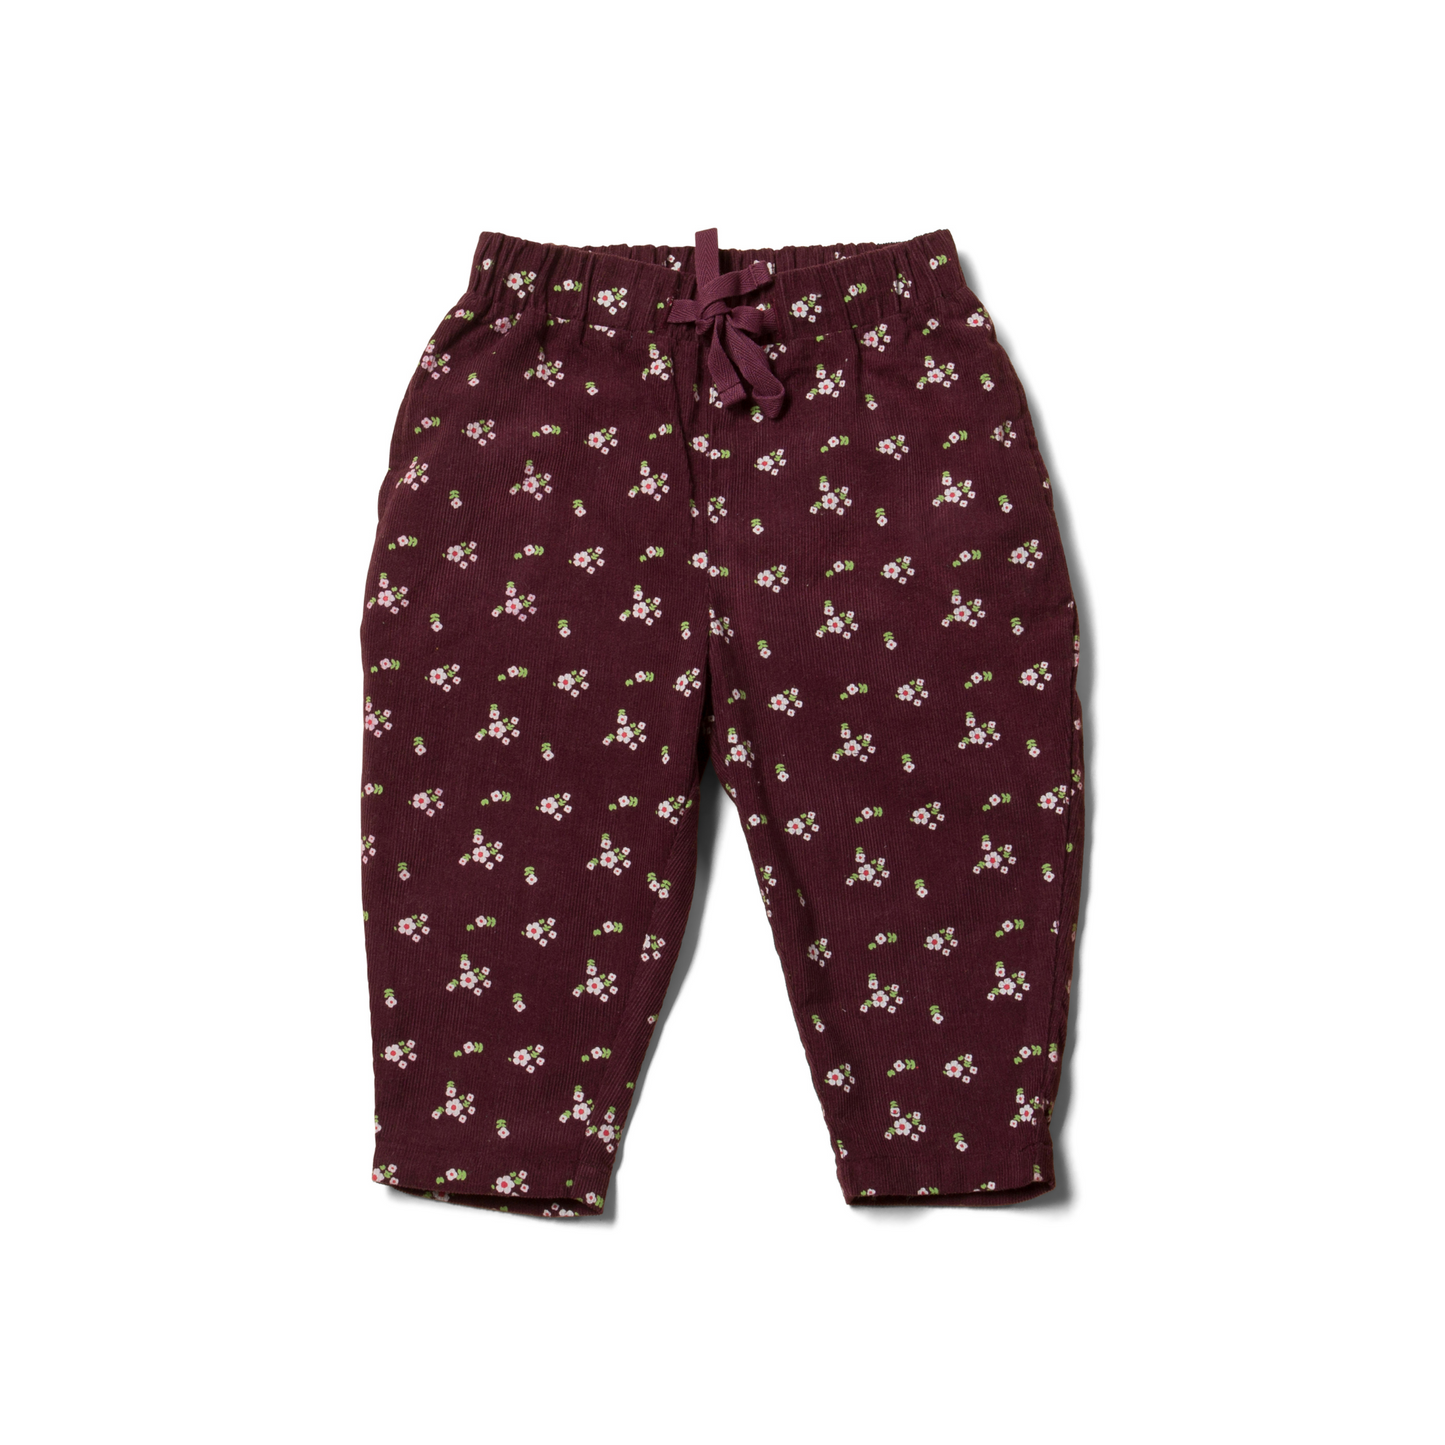 Plum flowers cord comfy trousers front